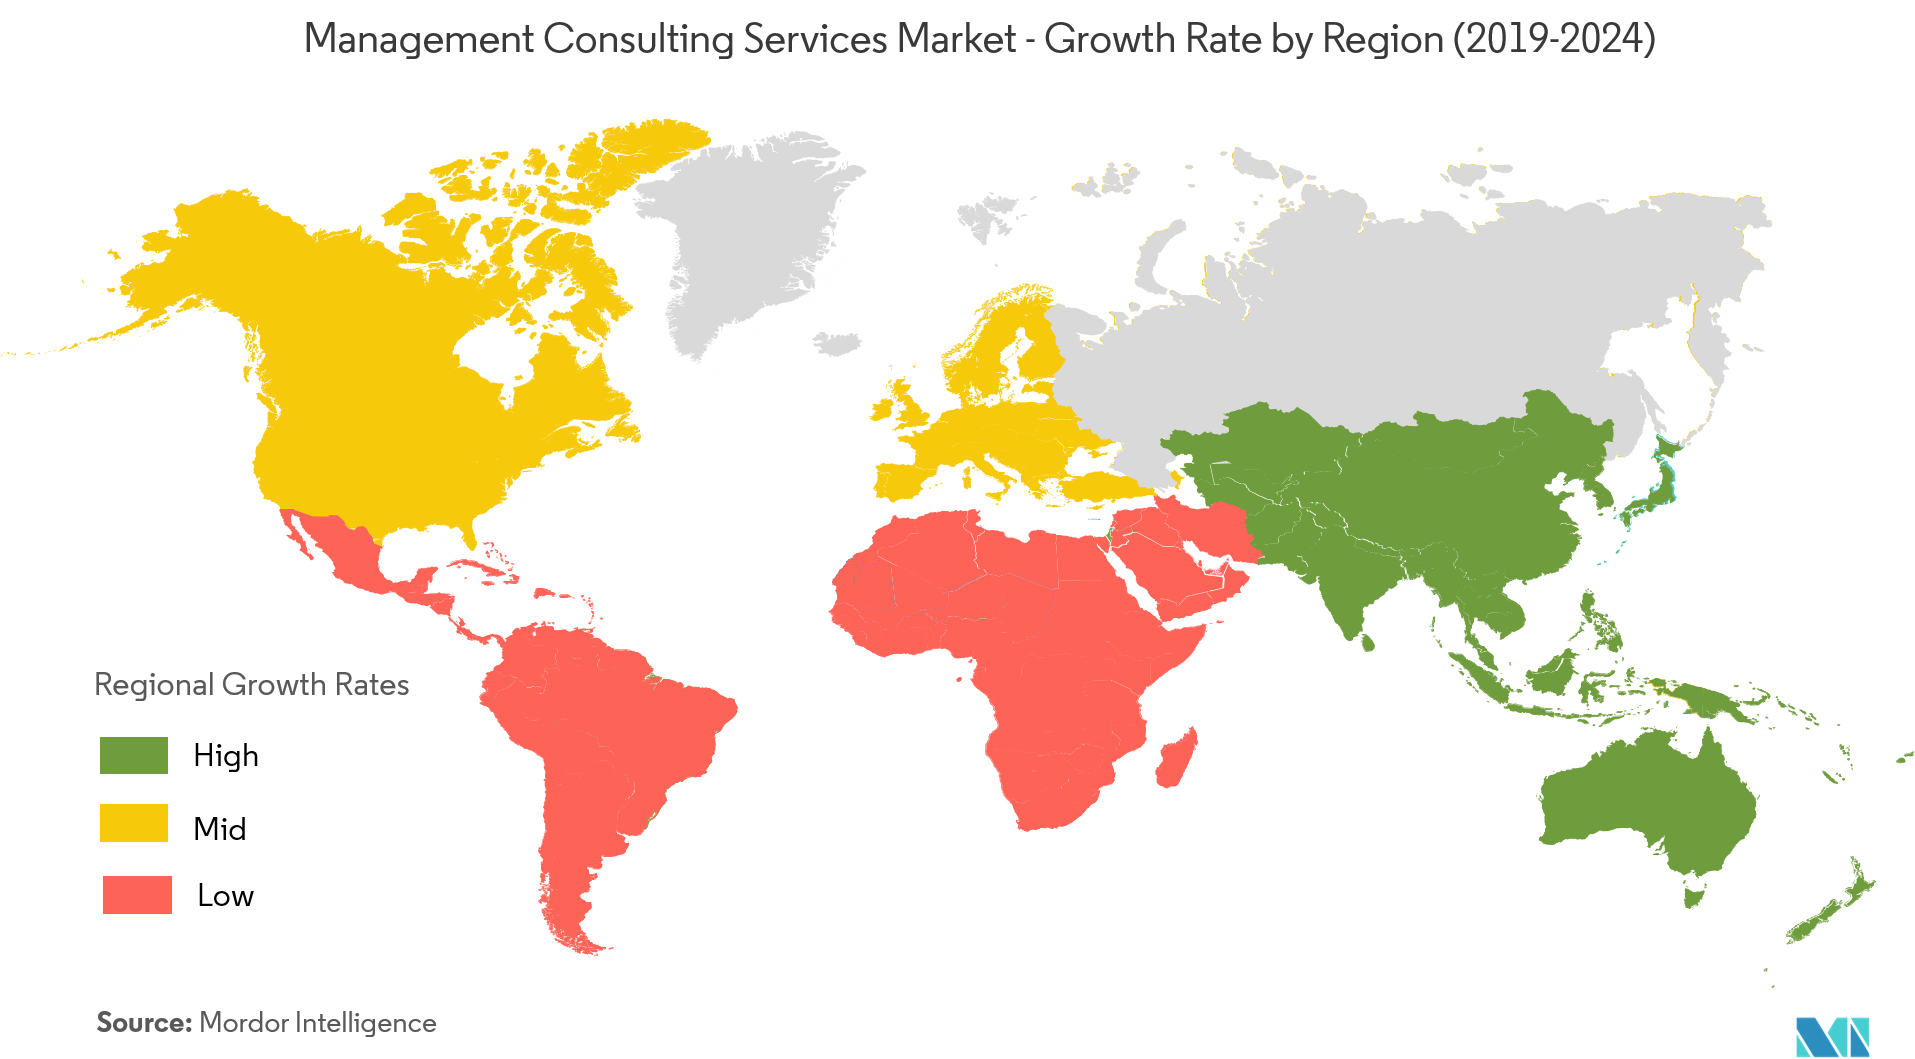 Management Consulting Services Market Growth by Region